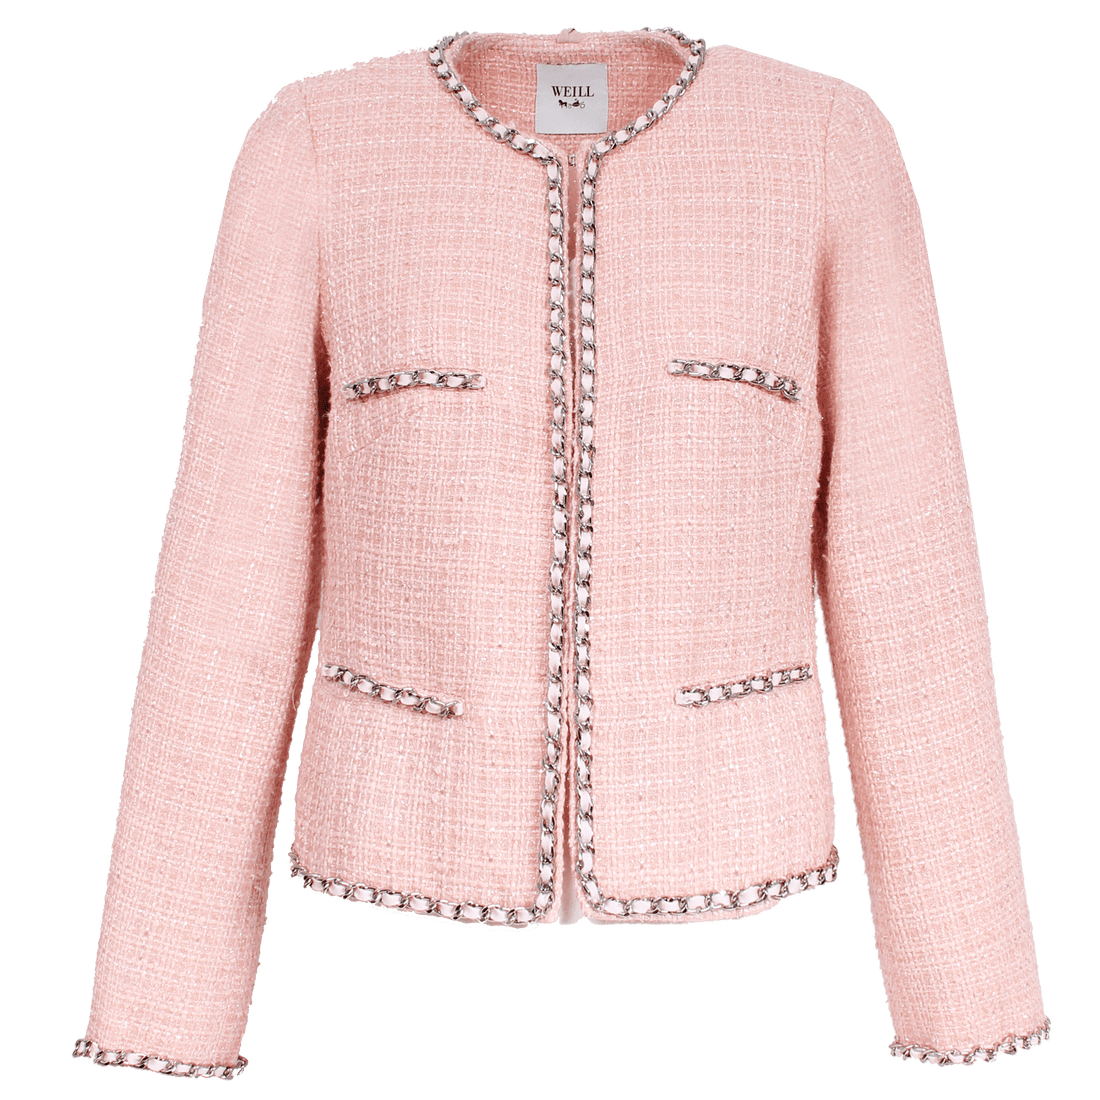 Weill Coats and Jackets Weill Mariata Jacket  in Soft Pink Tweed and Chain Edge 131028 izzi-of-baslow